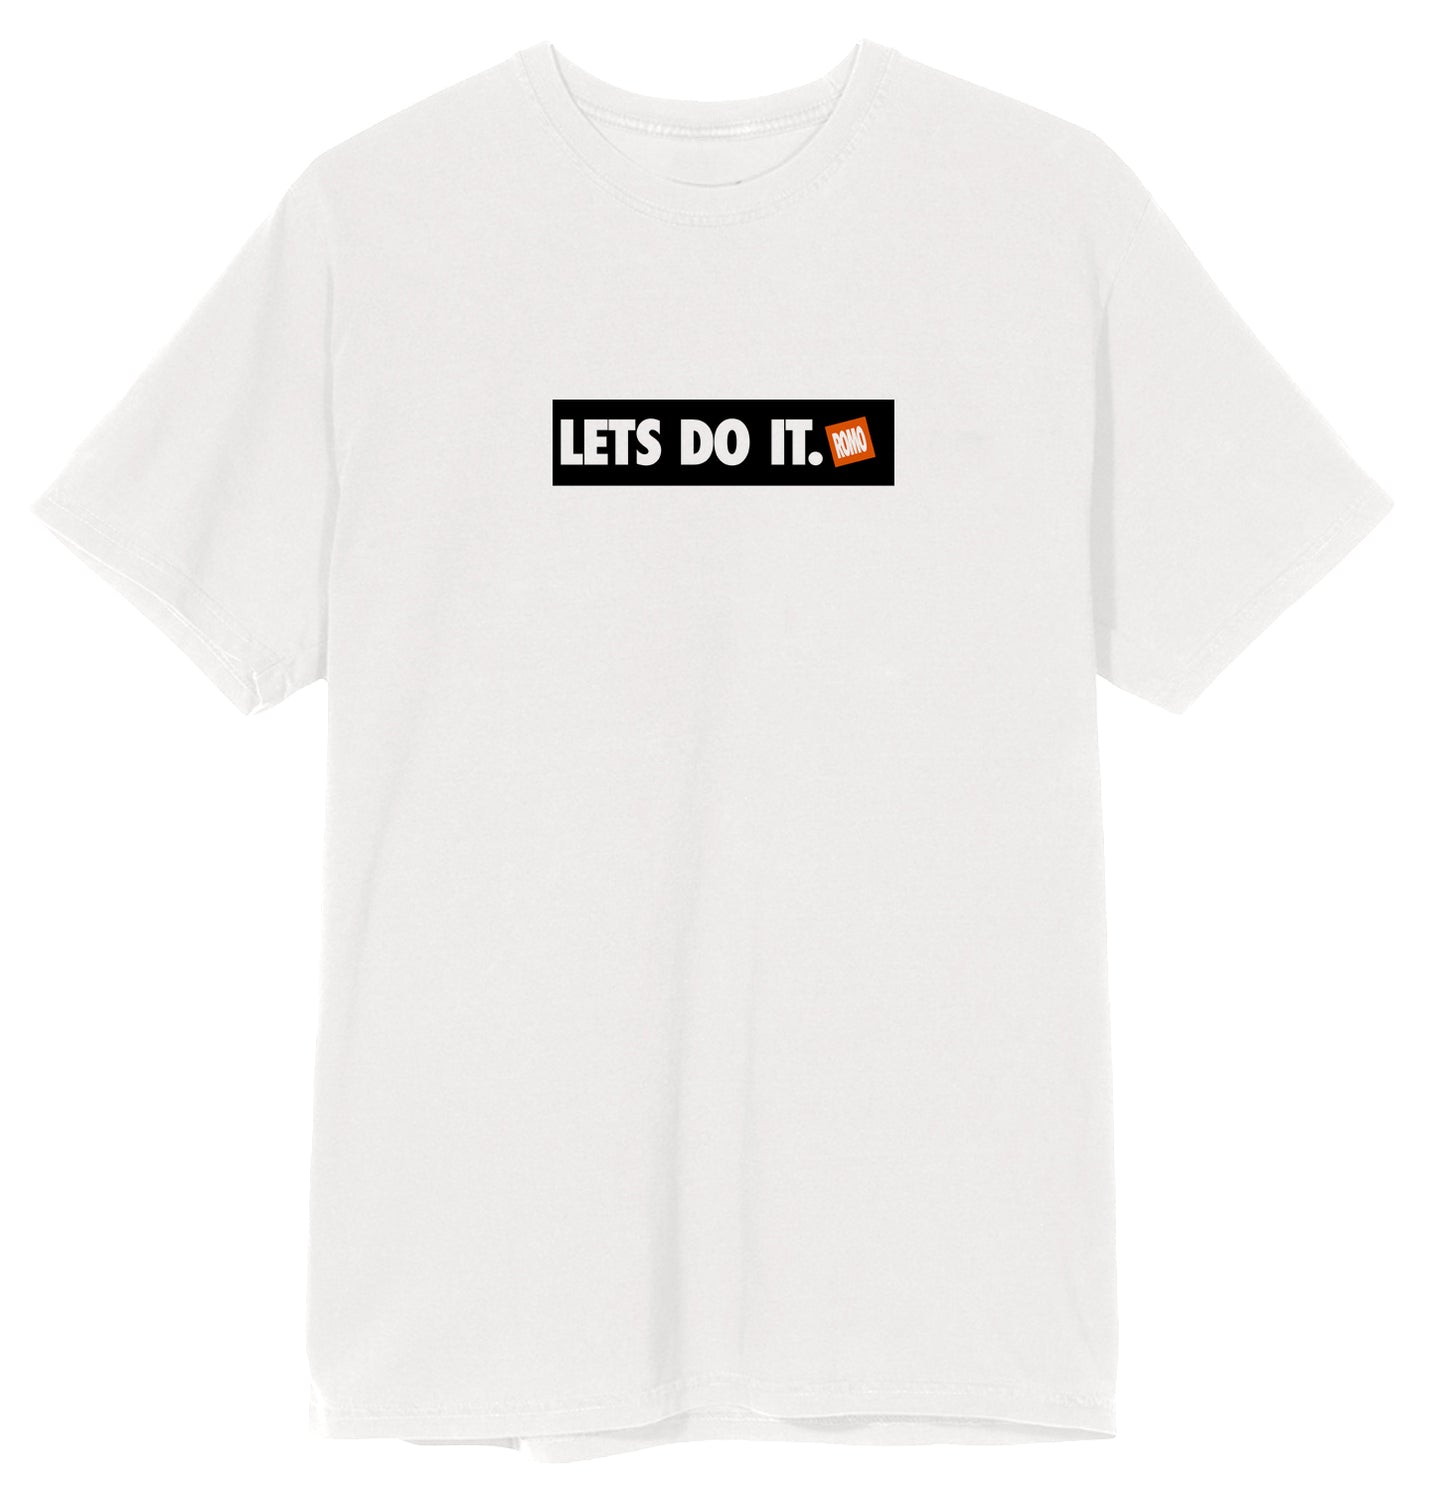 Lil Romo - Let's Do It White Tee + Download